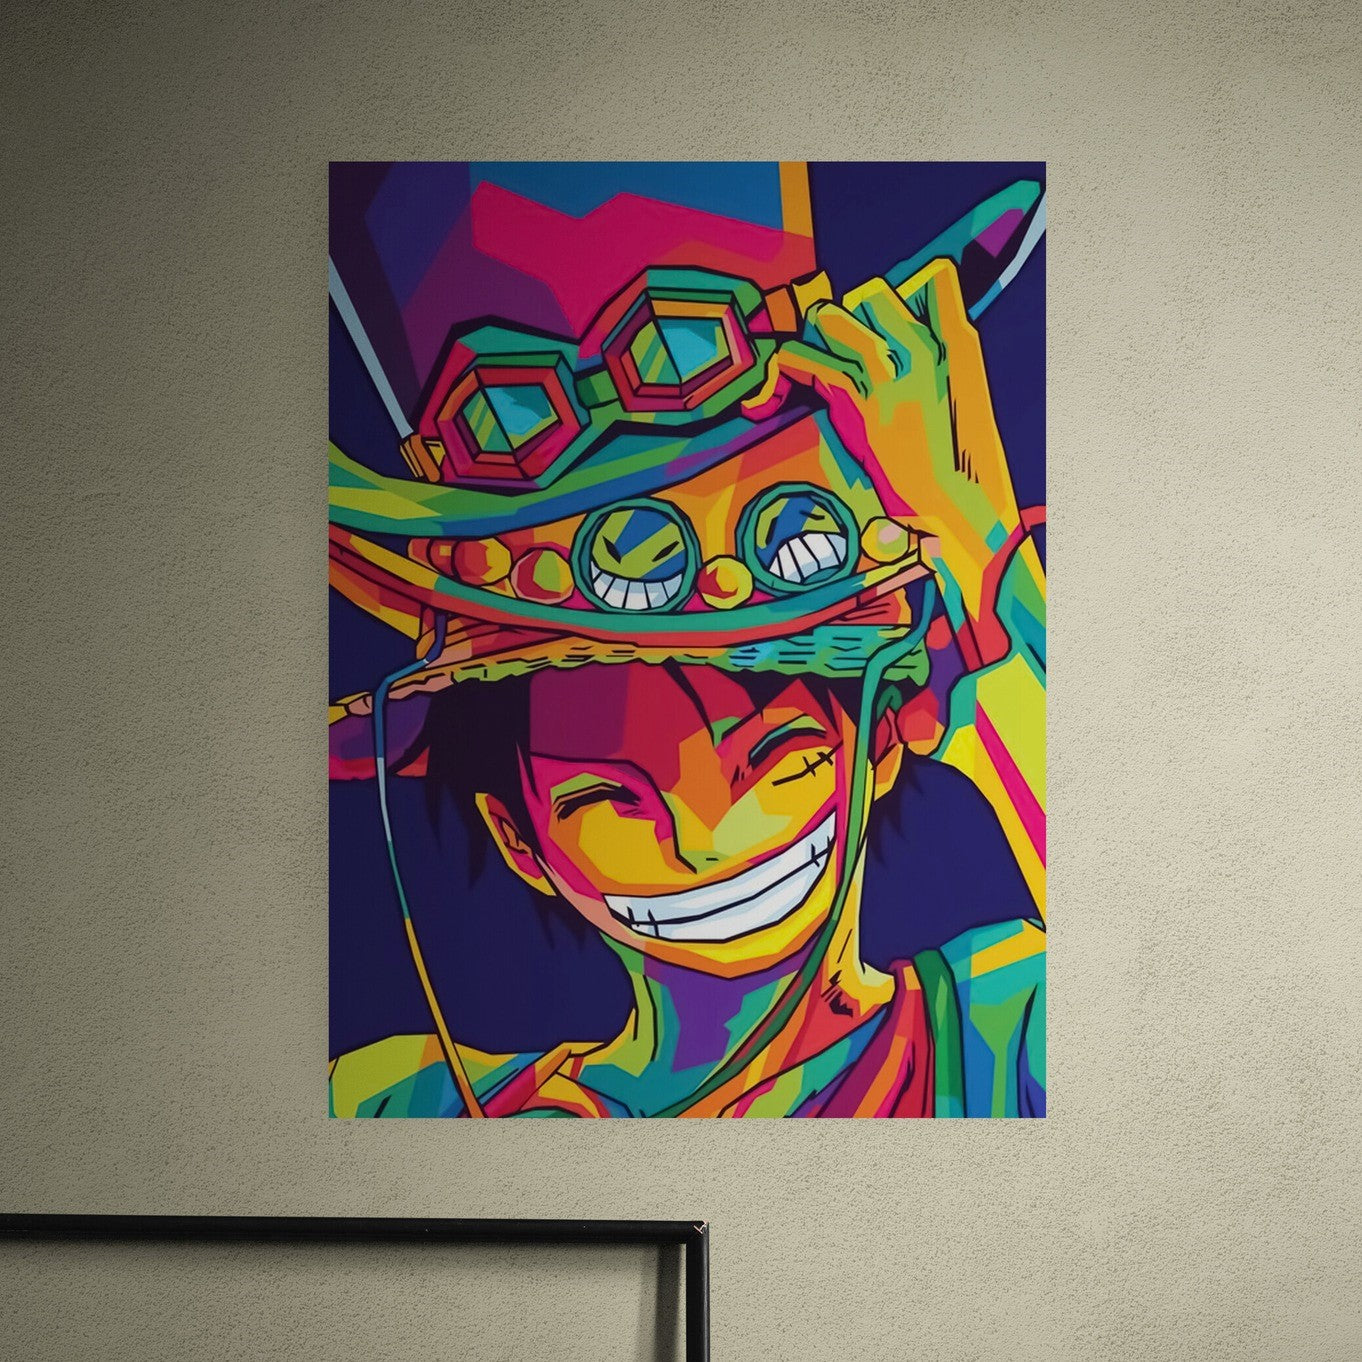 POSTER ANIME ONE PIECE LUFFY DECAL0070 –